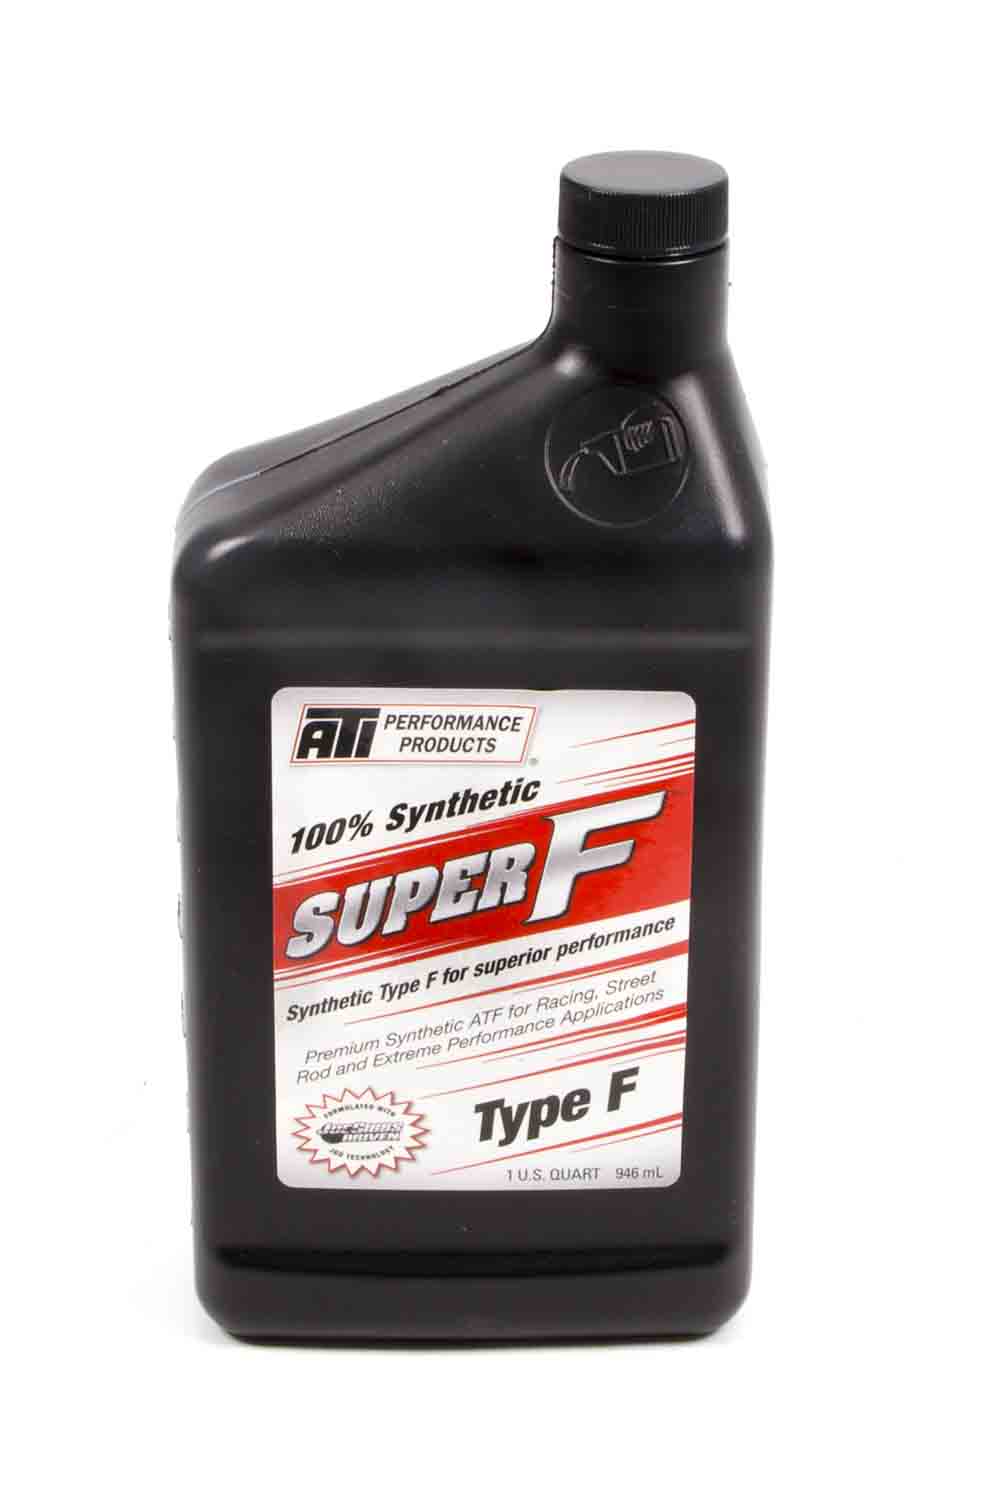 Shop for ATI PERFORMANCE PRODUCTS :: Racecar Engineering